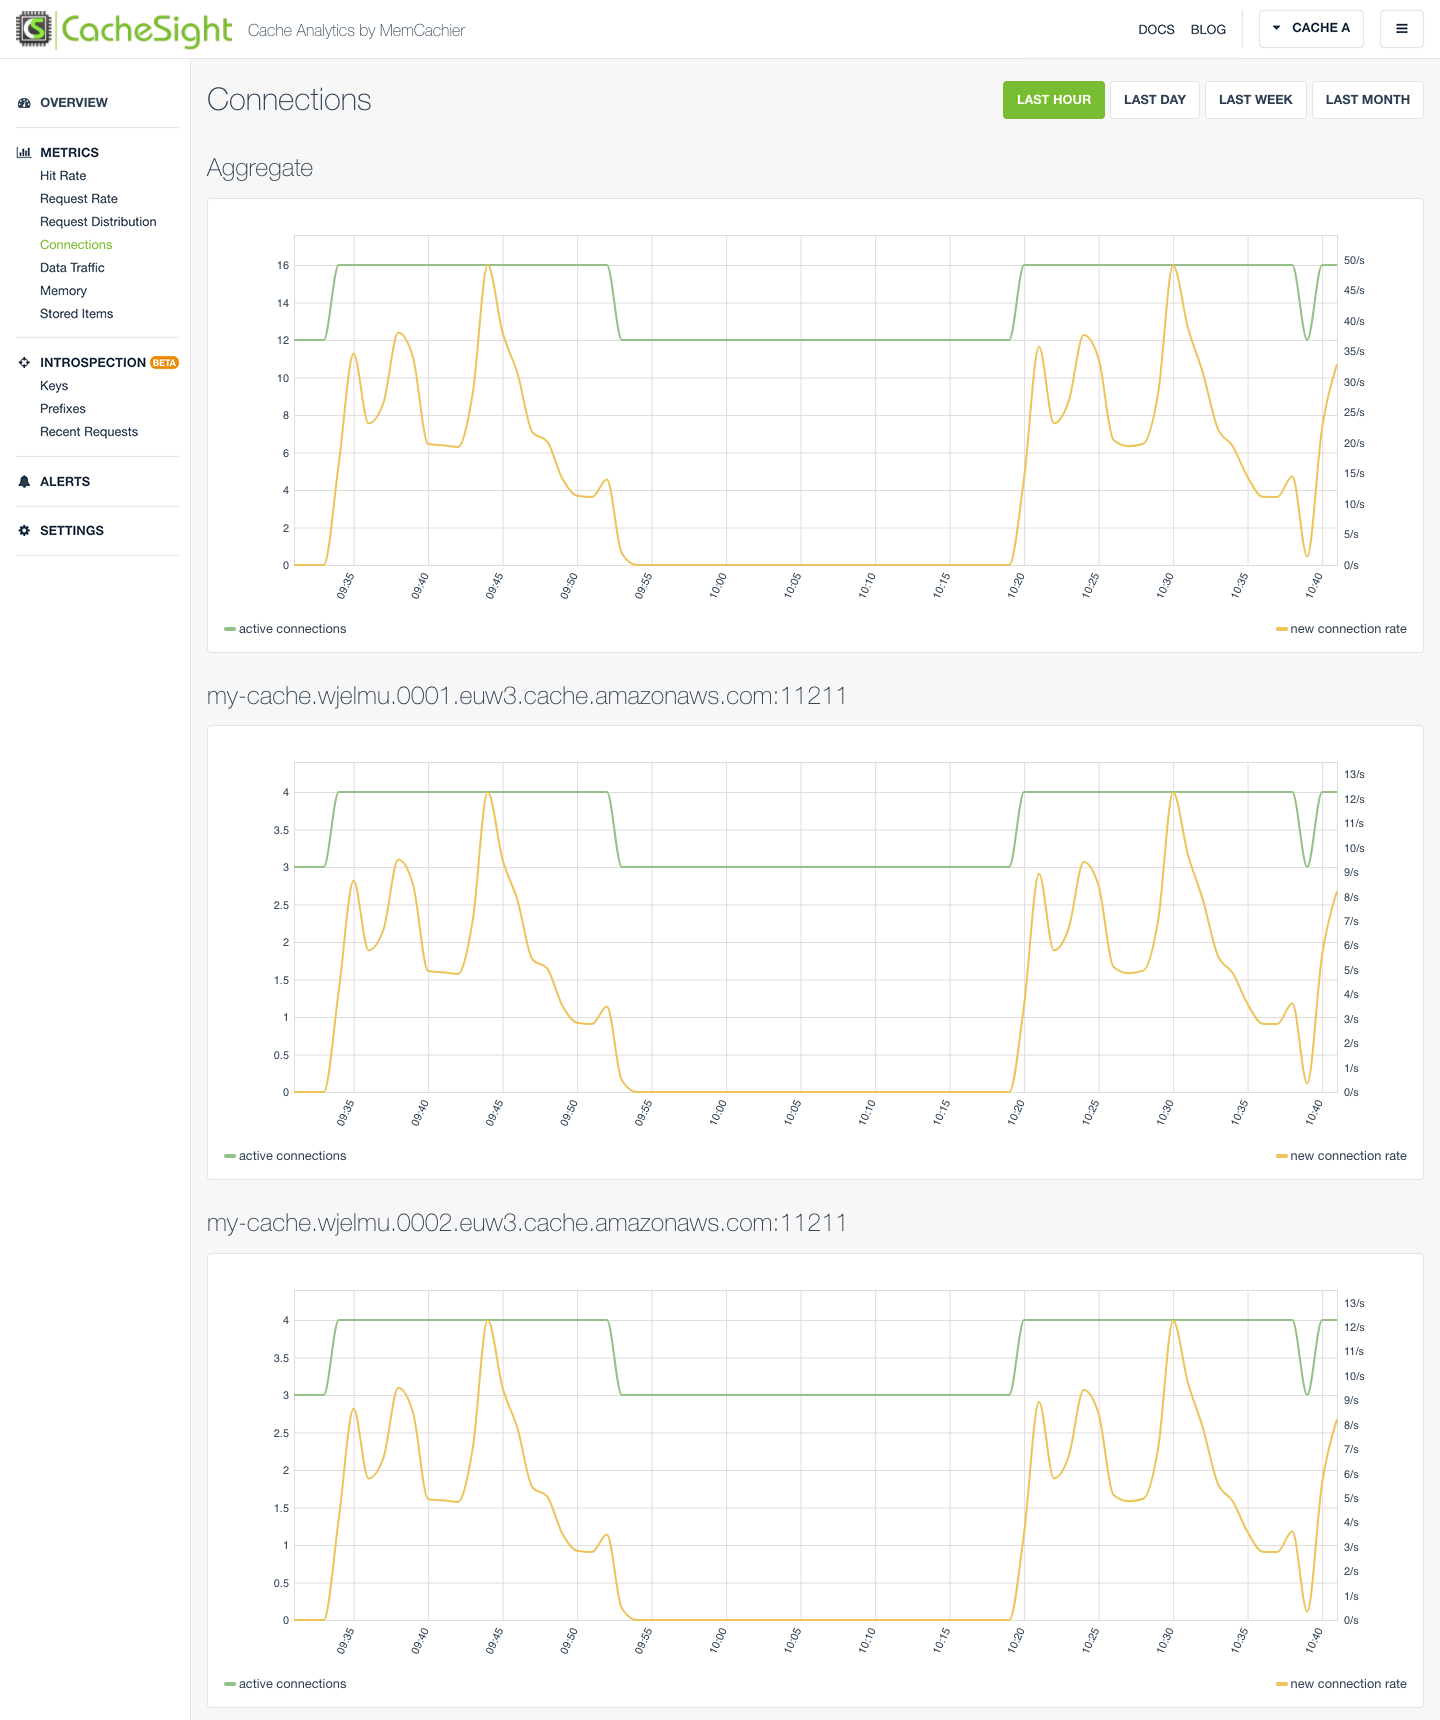 Screenshot of the CacheSight metrics per server connections view